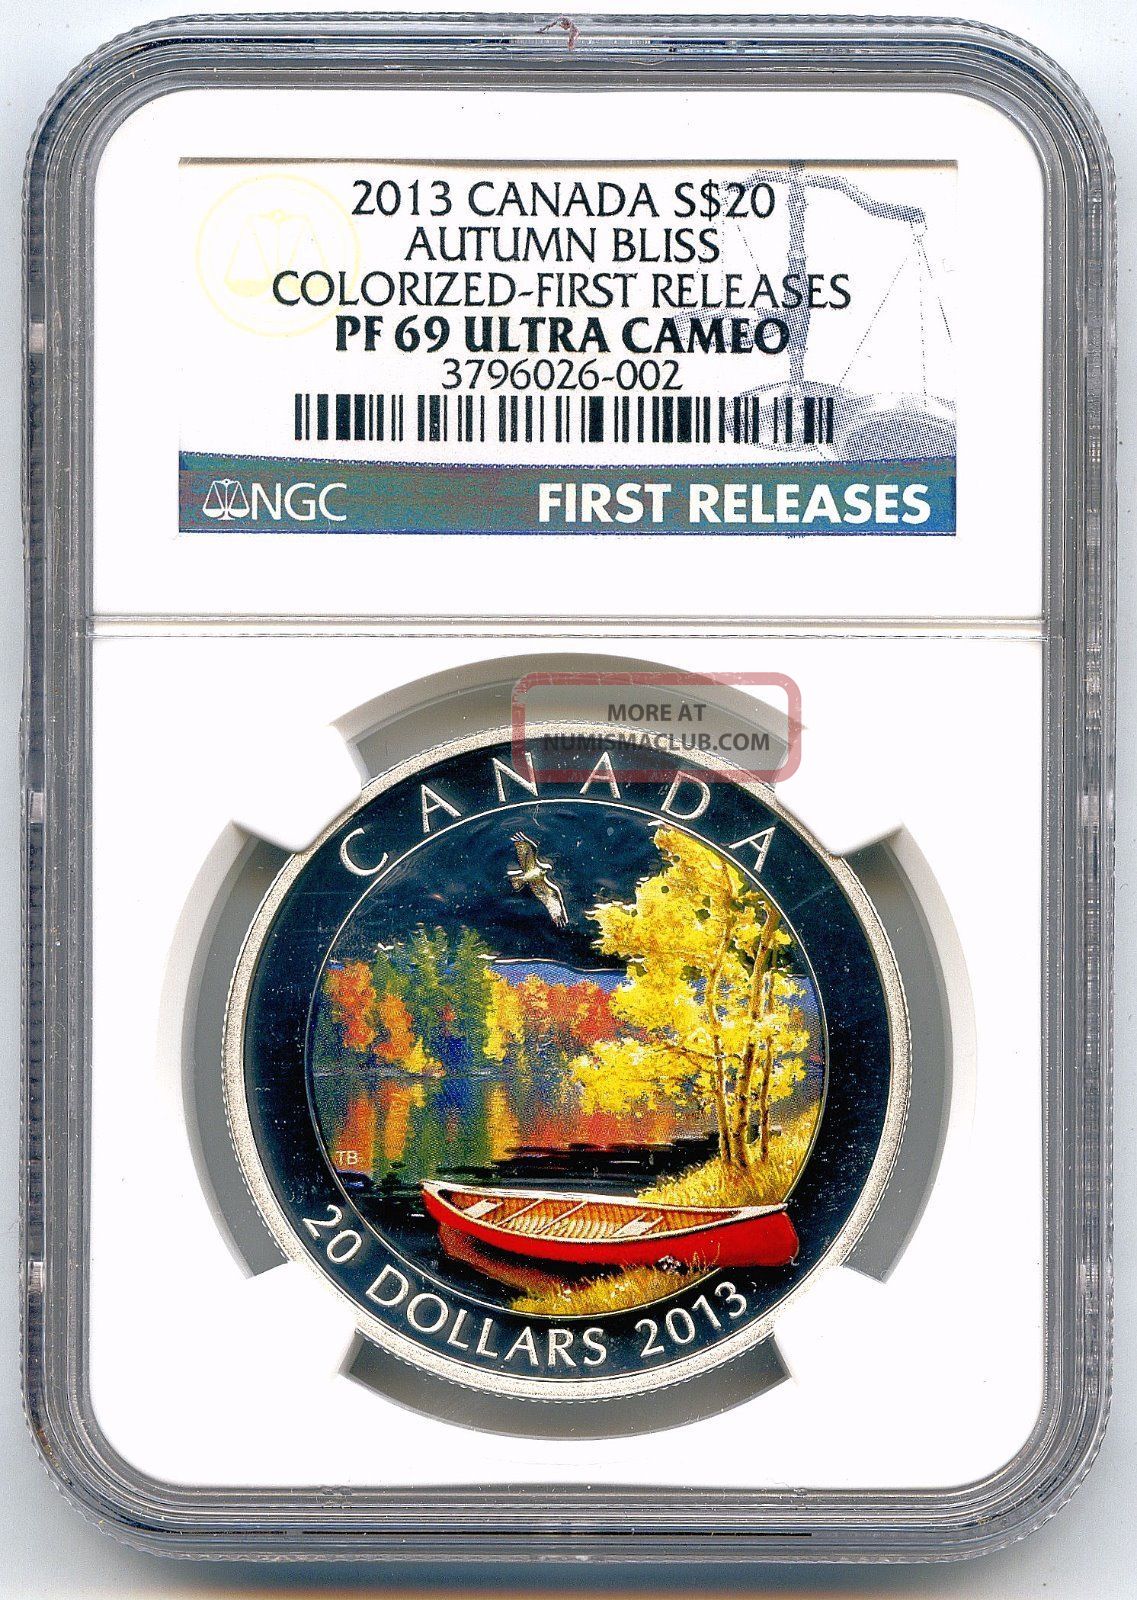 2013 Canada S$20 Autumn Bliss Colorized First Release Pf69 